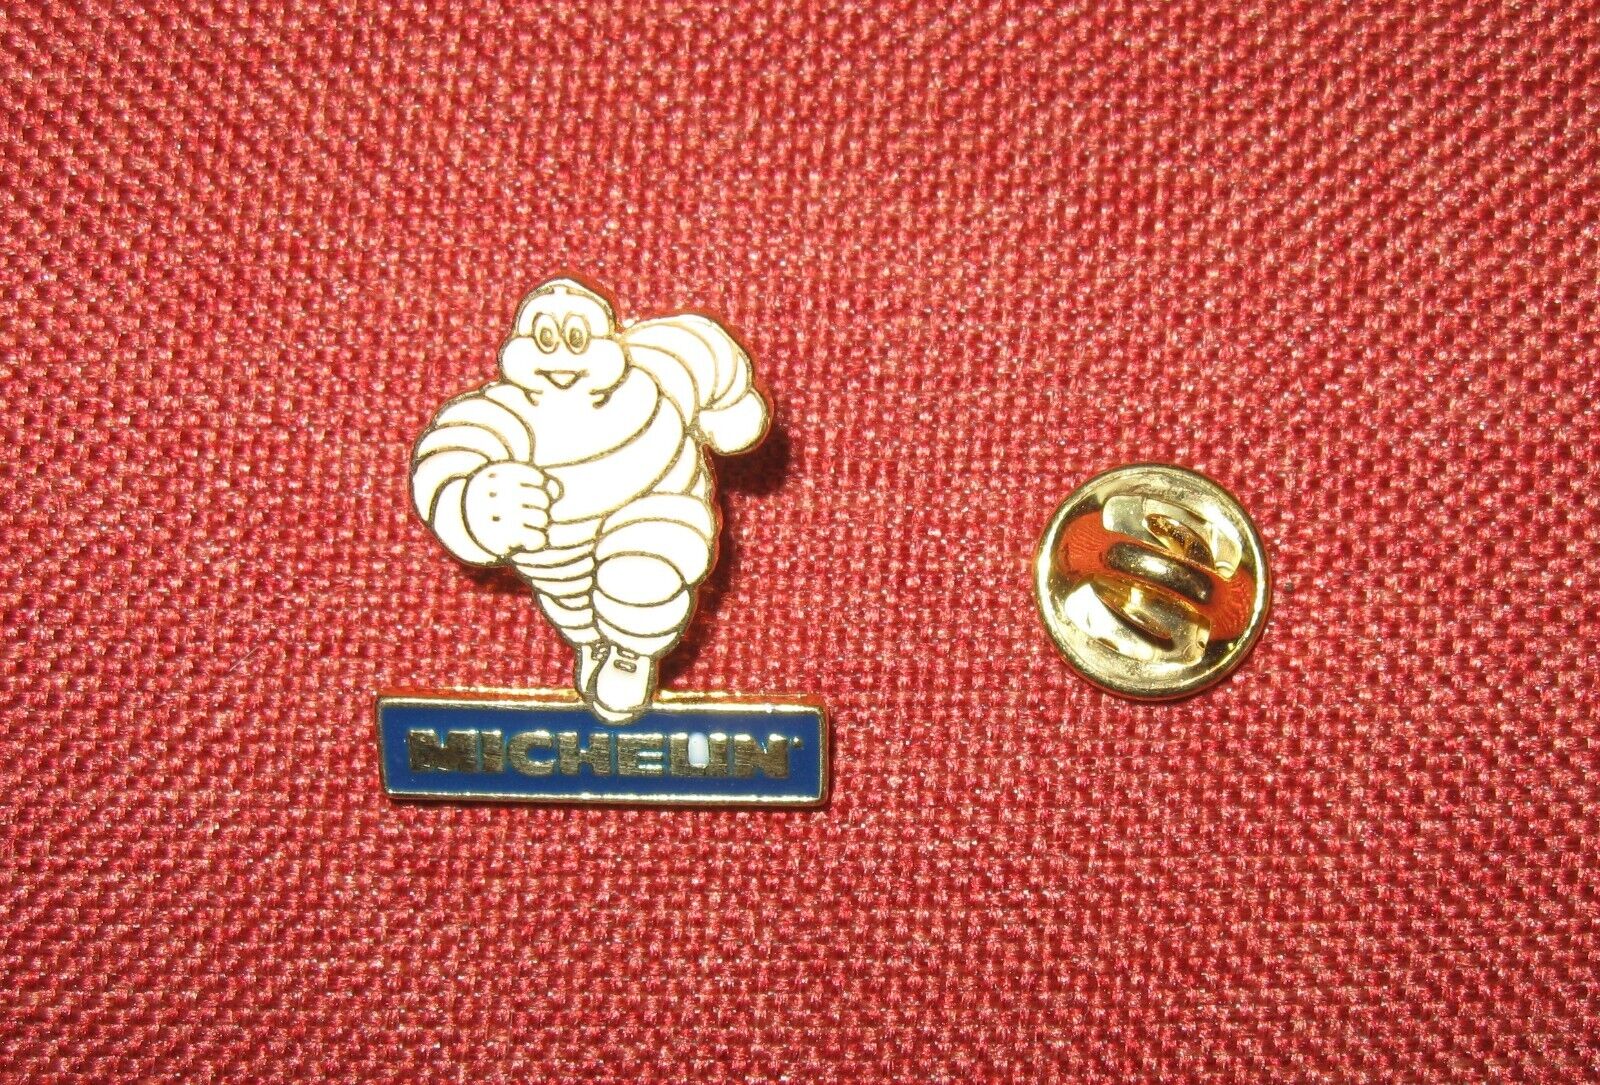 Vintage Michelin Tire Man Lapel Pin - Collectible Advertising